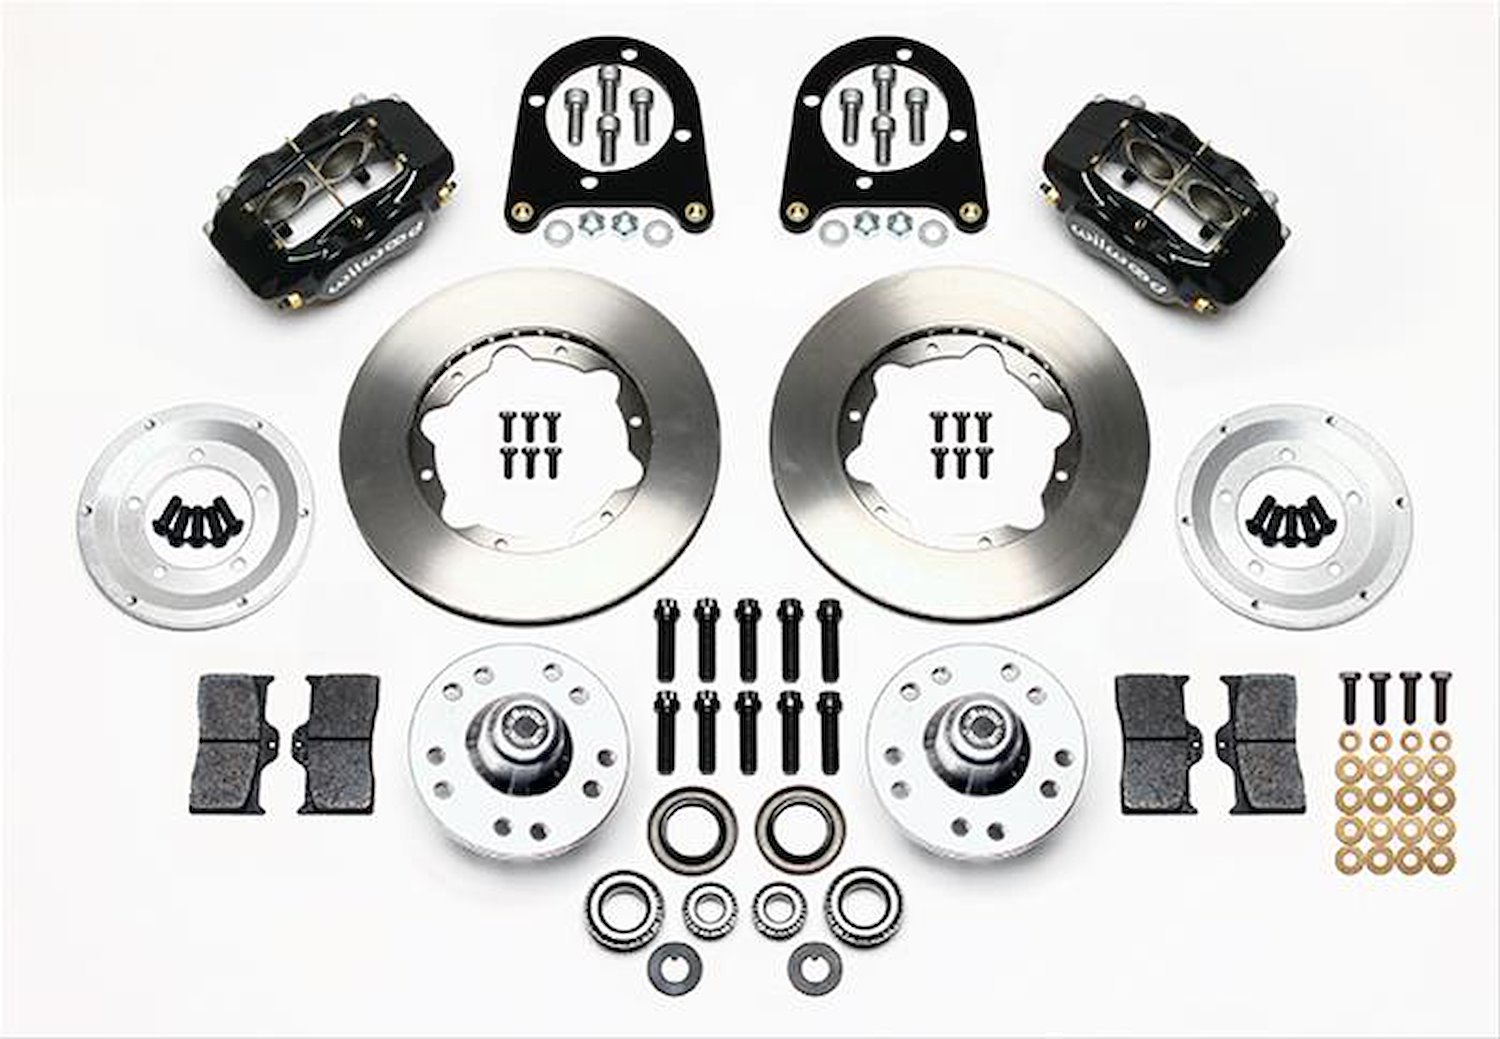 Forged Dynalite Pro Series Front Hub Kit 1937-1948 Ford Vehicles